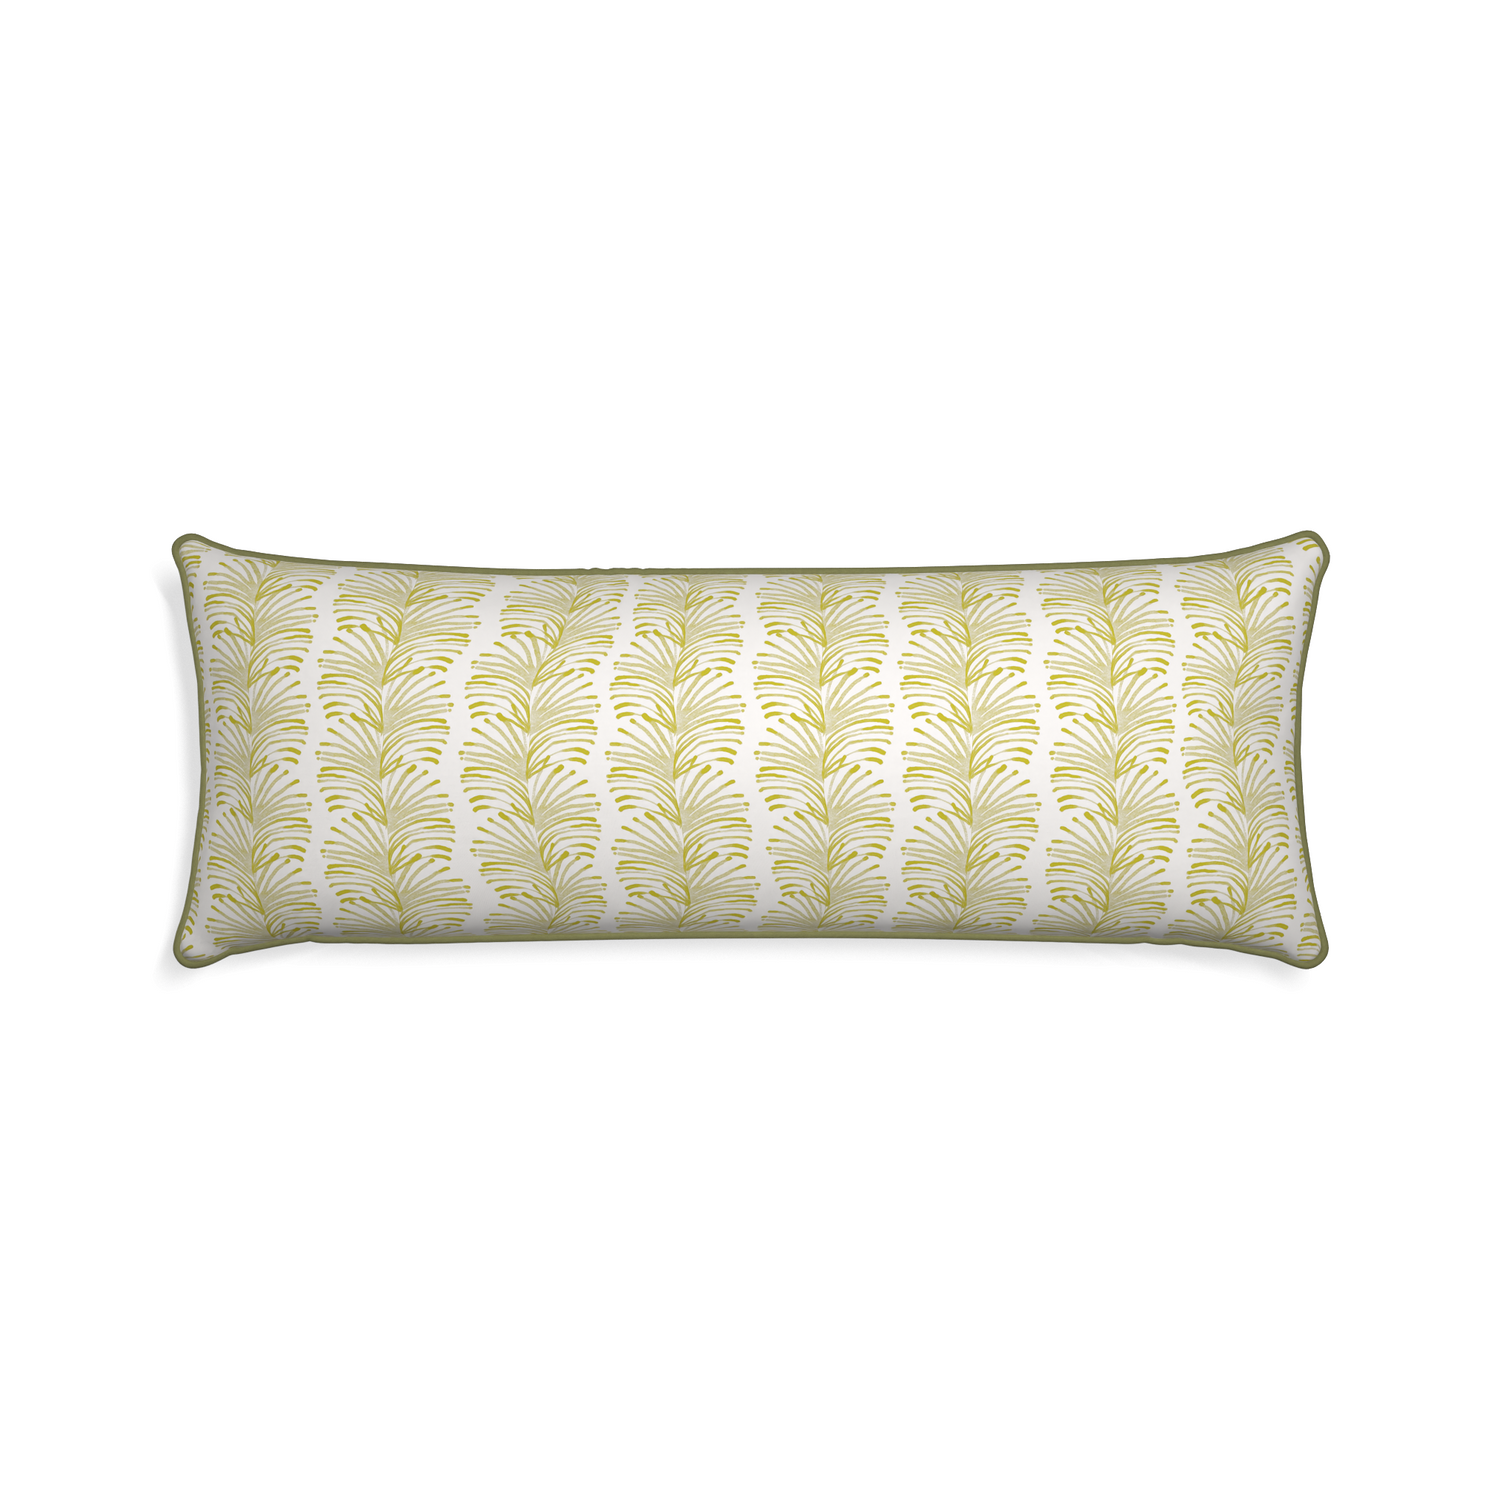 Xl-lumbar emma chartreuse custom yellow stripe chartreusepillow with moss piping on white background